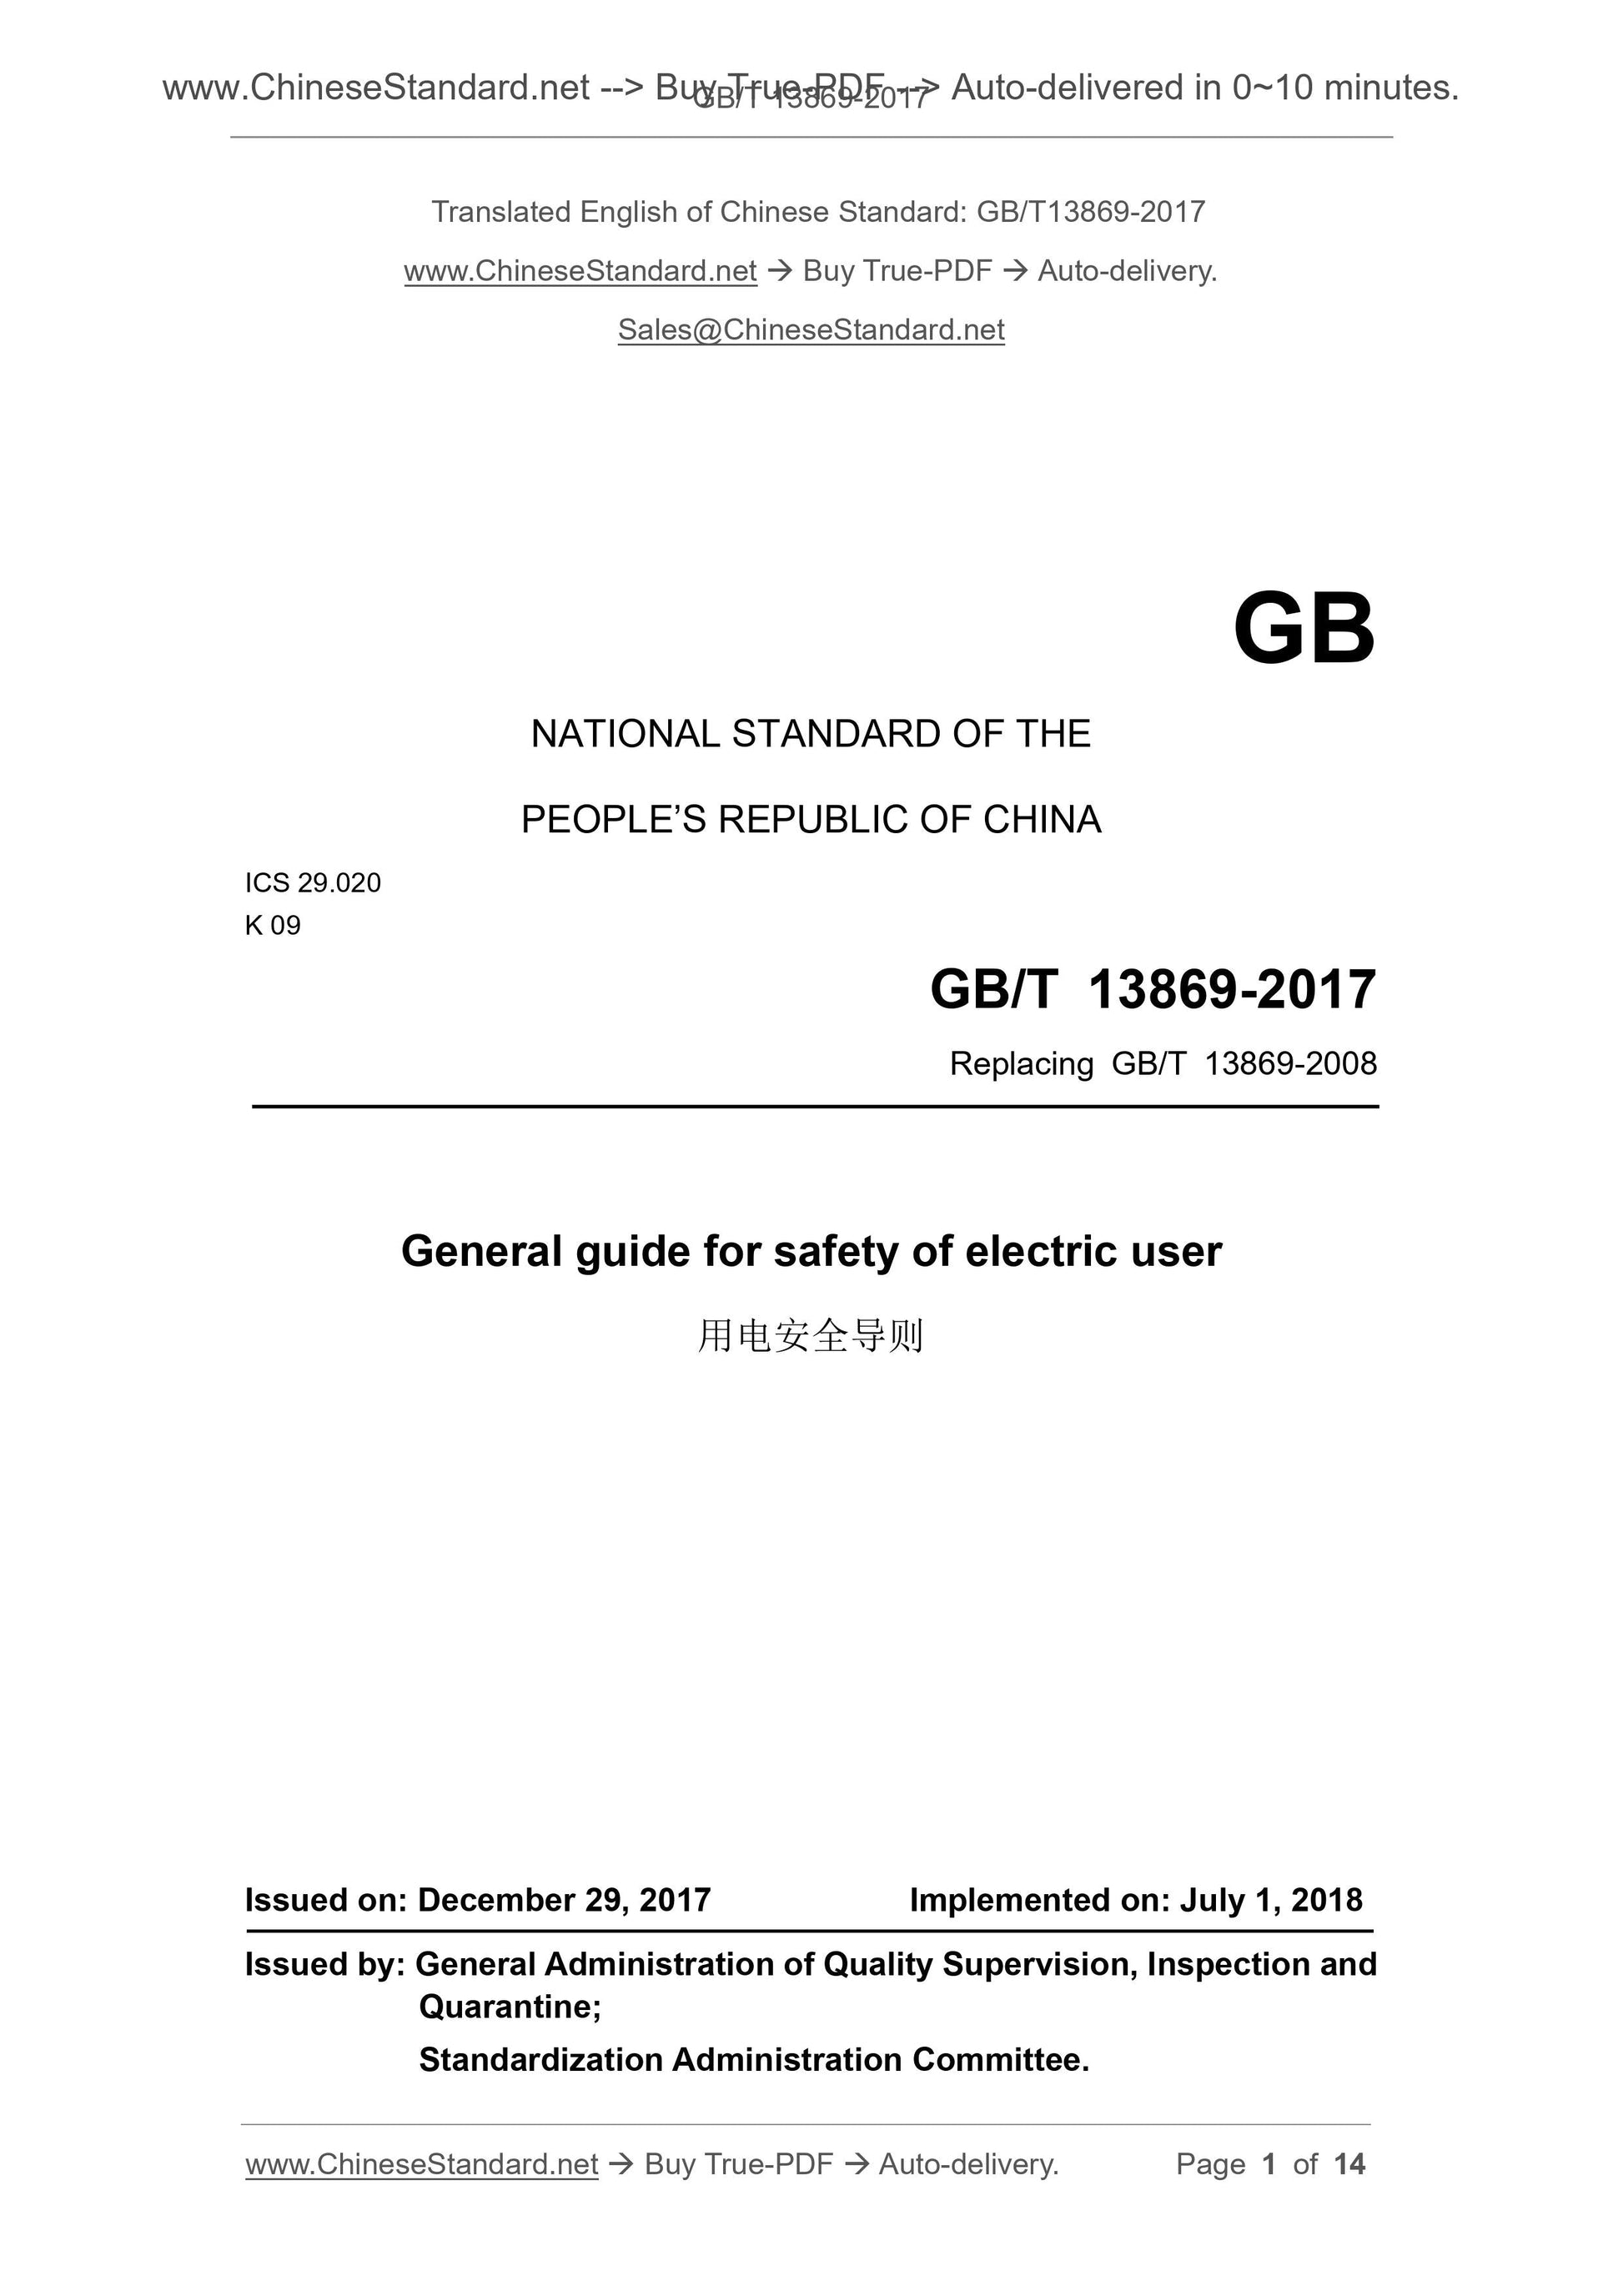 GB/T 13869-2017 Page 1